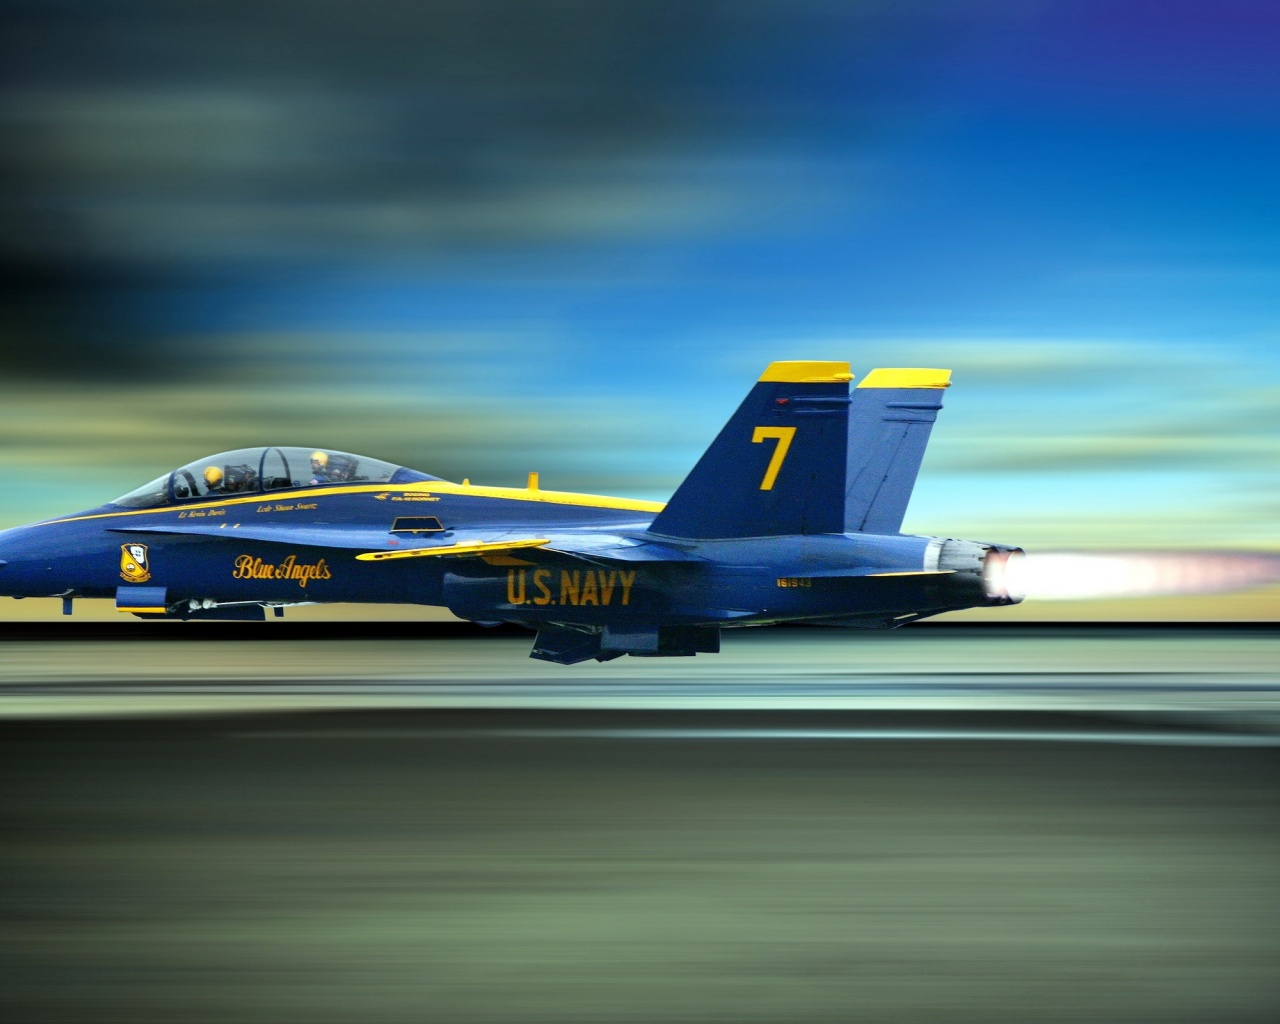 Blue Angels The High Speed Flying Fighter